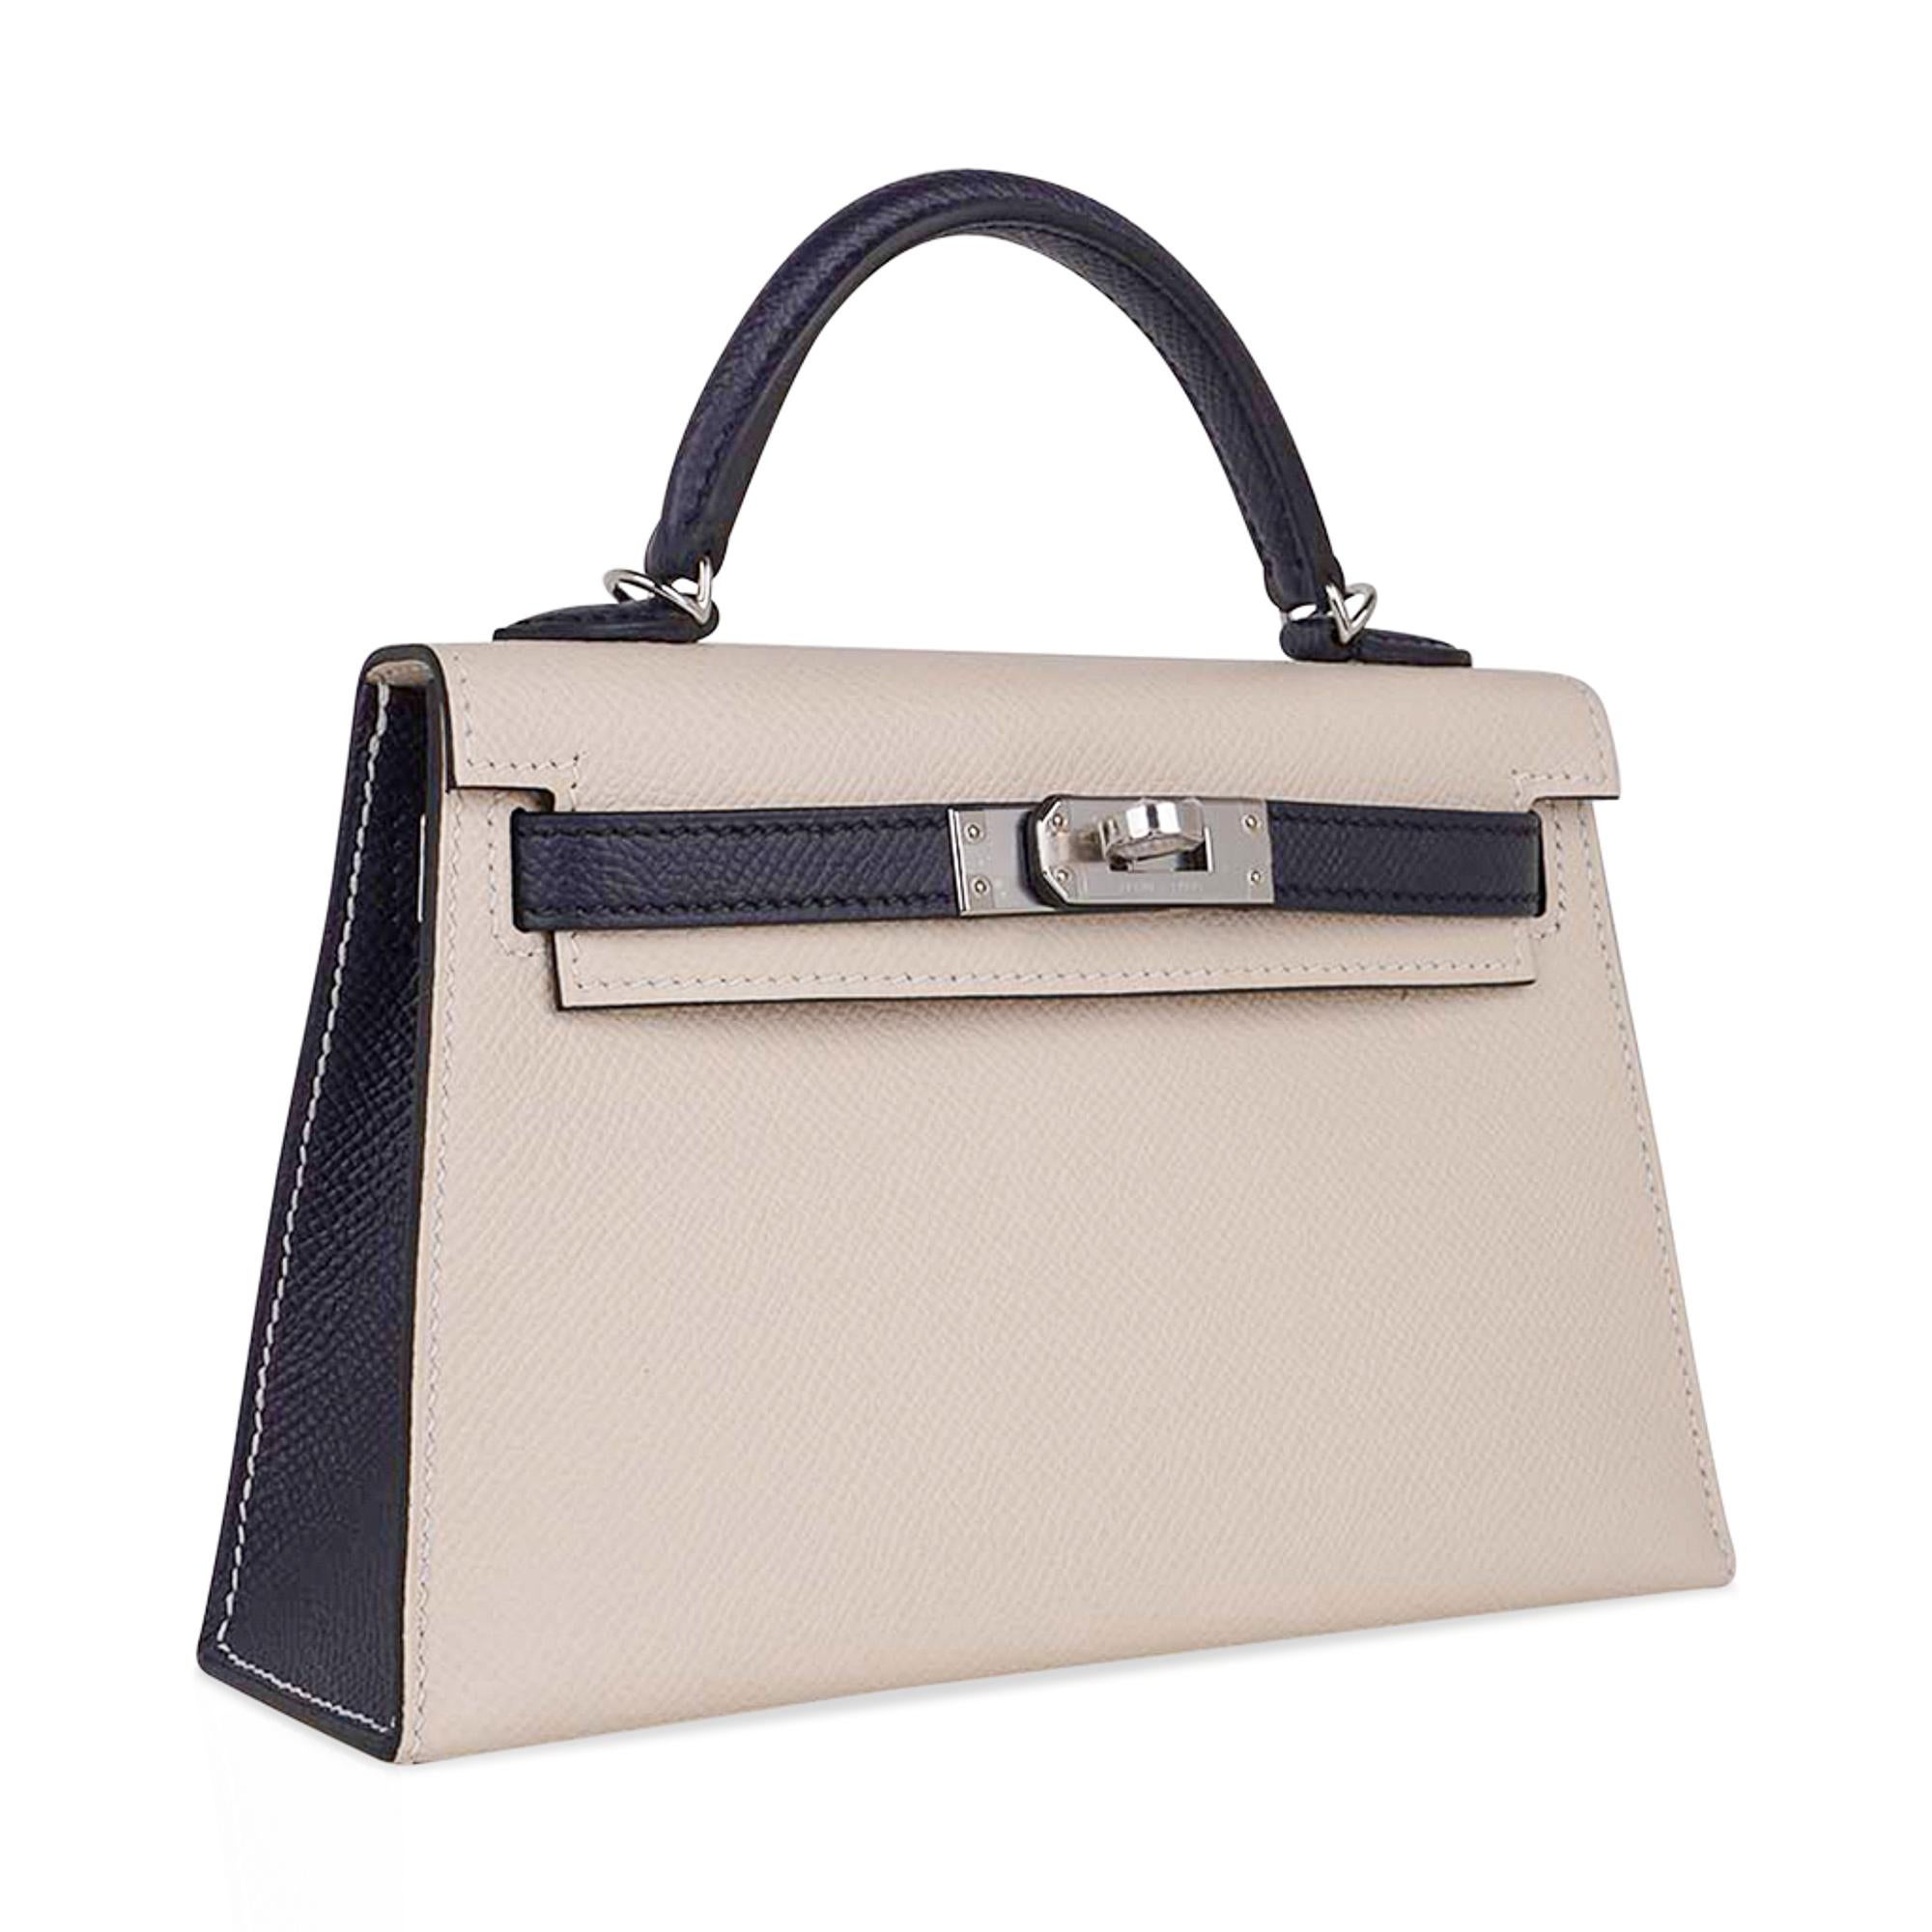 Mightychic offers an Hermes Kelly HSS 20 Mini Sellier bag featured in coveted Craie and Blue Indigo.
A beautiful classic combination.
Epsom leather accentuated with Palladium hardware.
Comes with signature Hermes box, shoulder strap, and